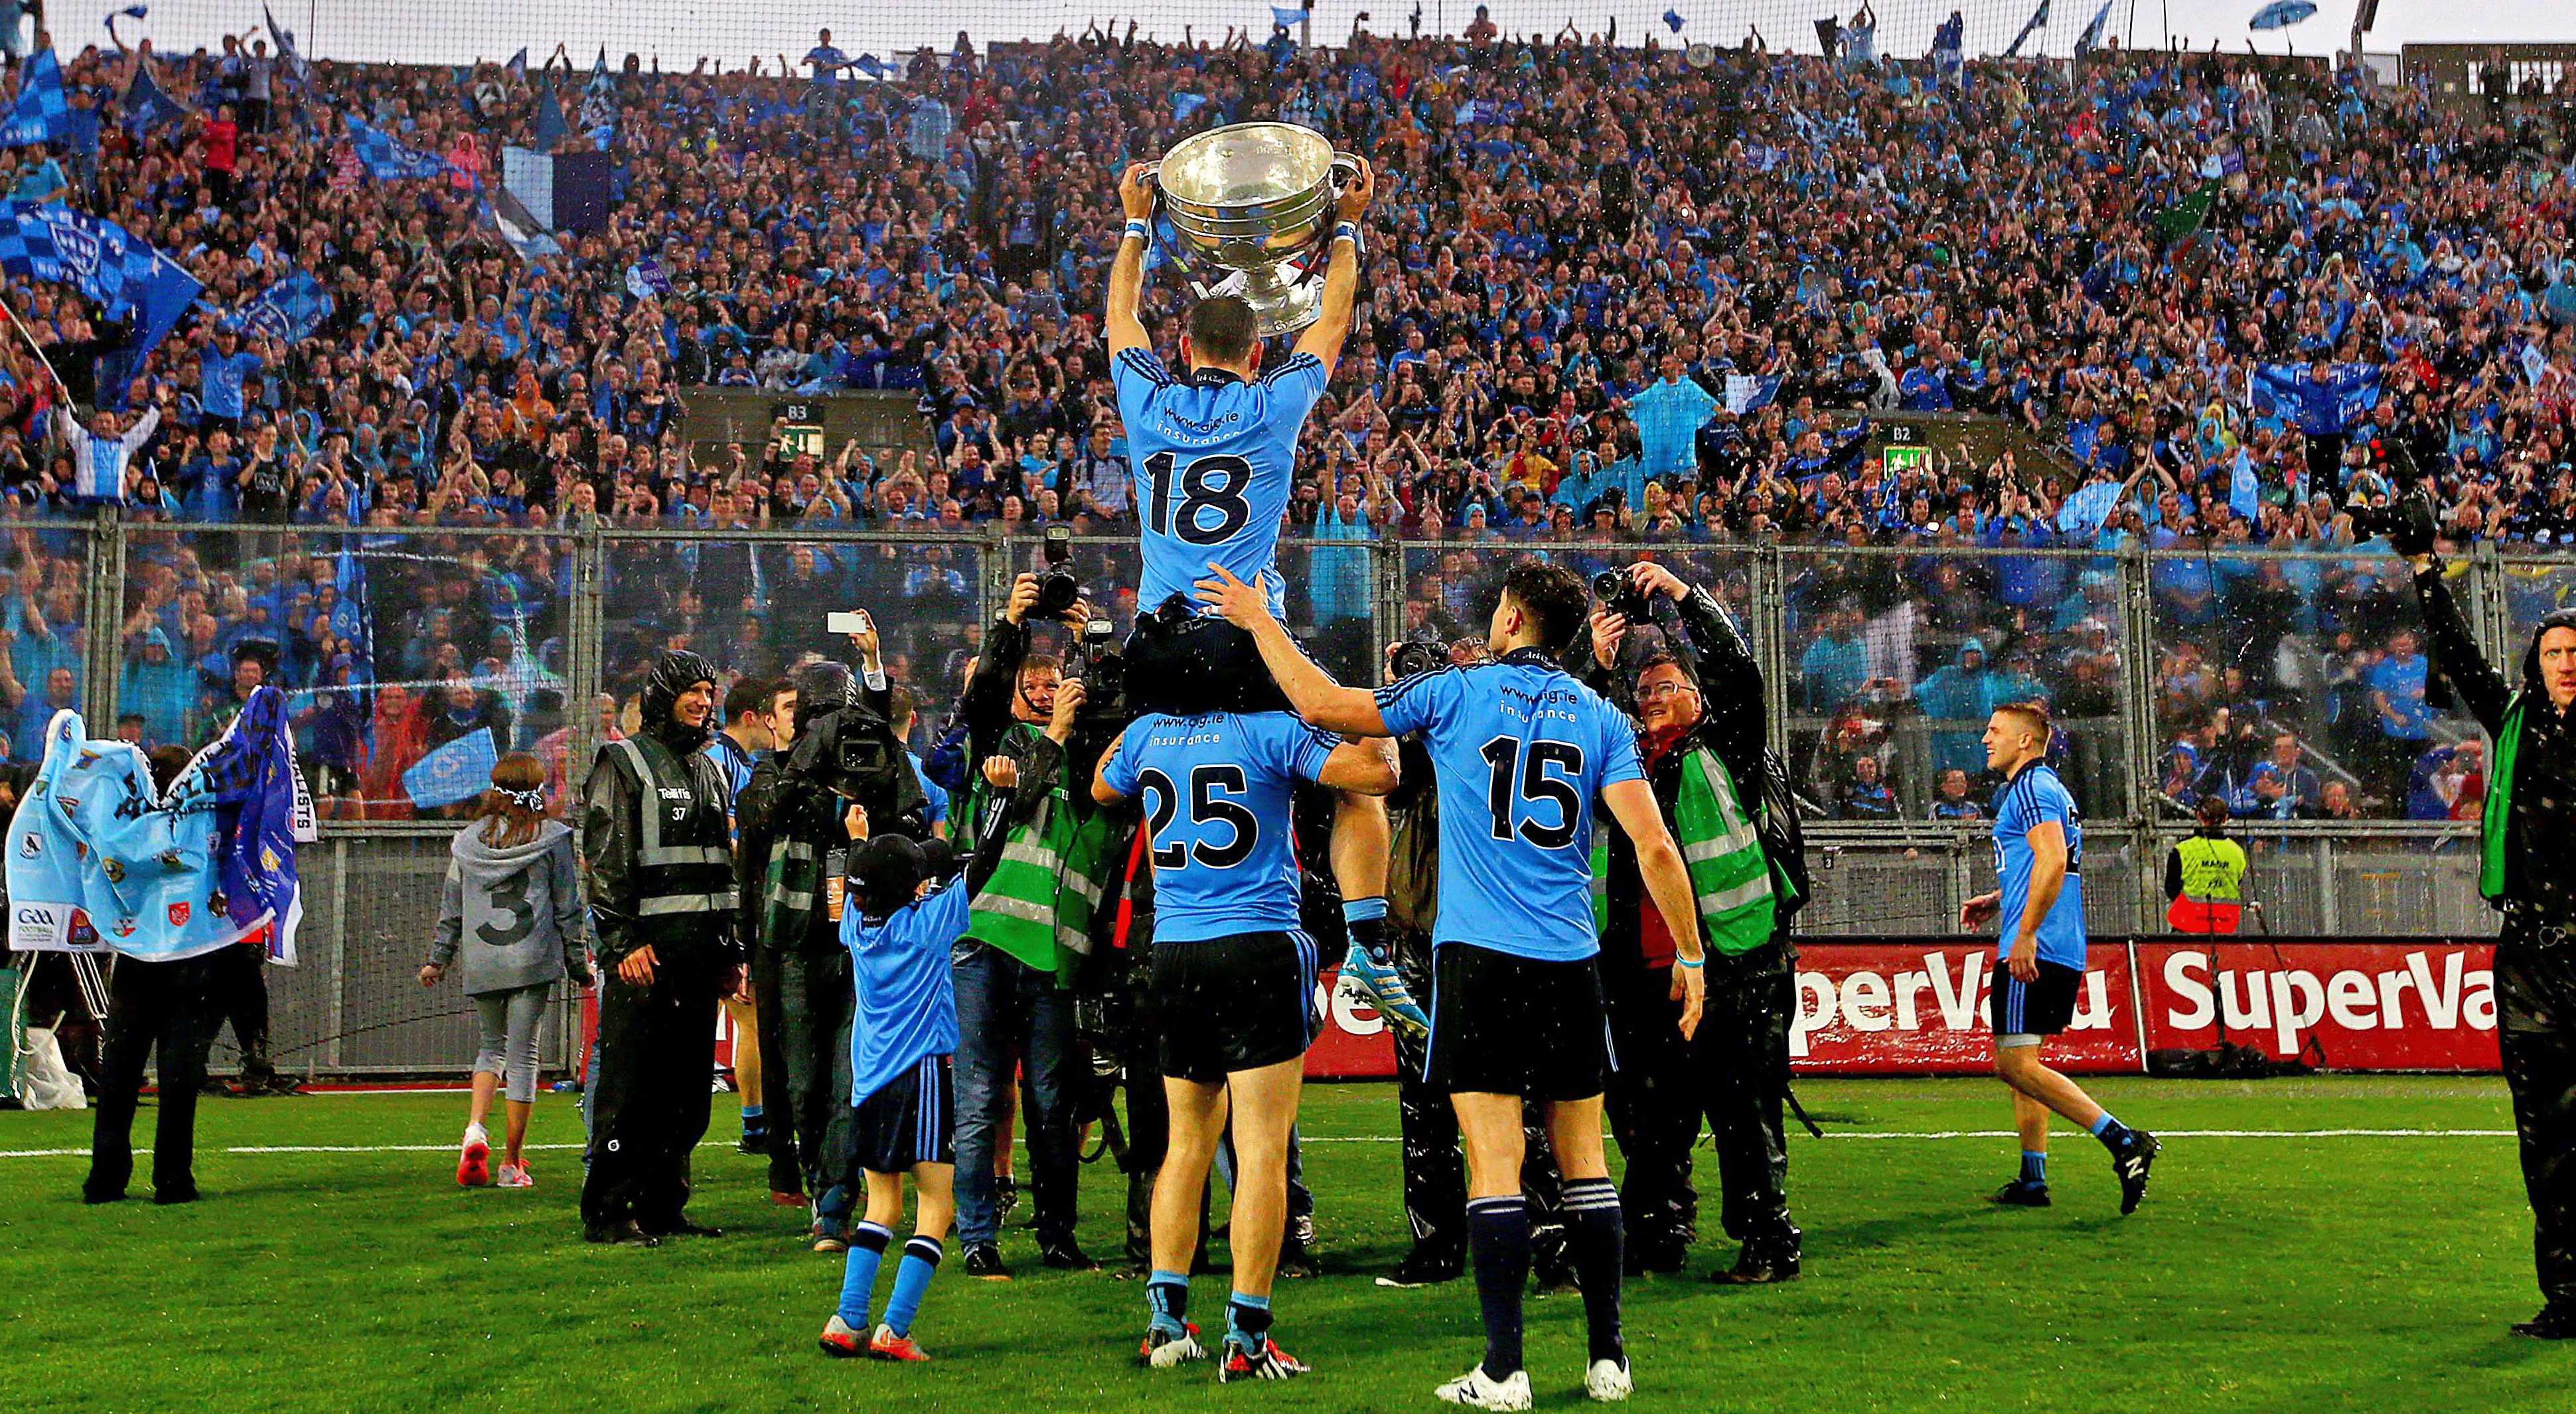 Lesser lights shine as Dublin battle their way to historic victory and leave Kingdom in the shade